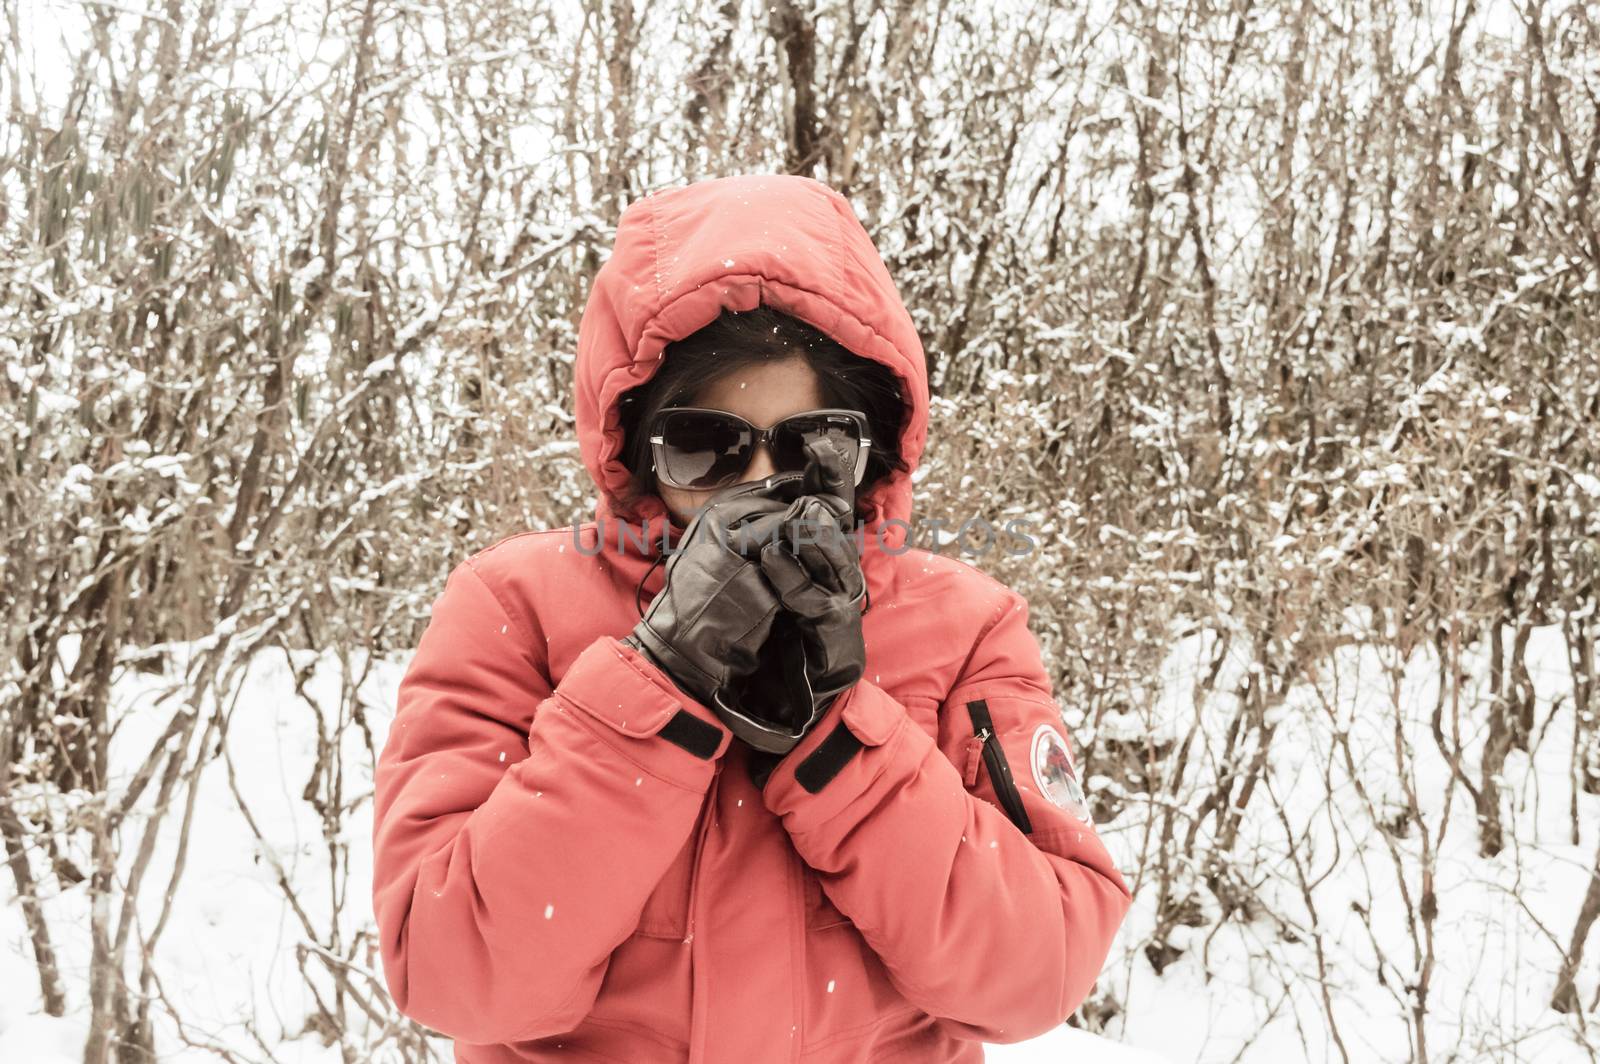 Smiling happy joyful Portrait of a Woman wearing a red pullover jacket and gloves enjoying first snow while shakes off snowball. Enjoy Snowing day view in winter. Rural village Jammu and Kashmir India